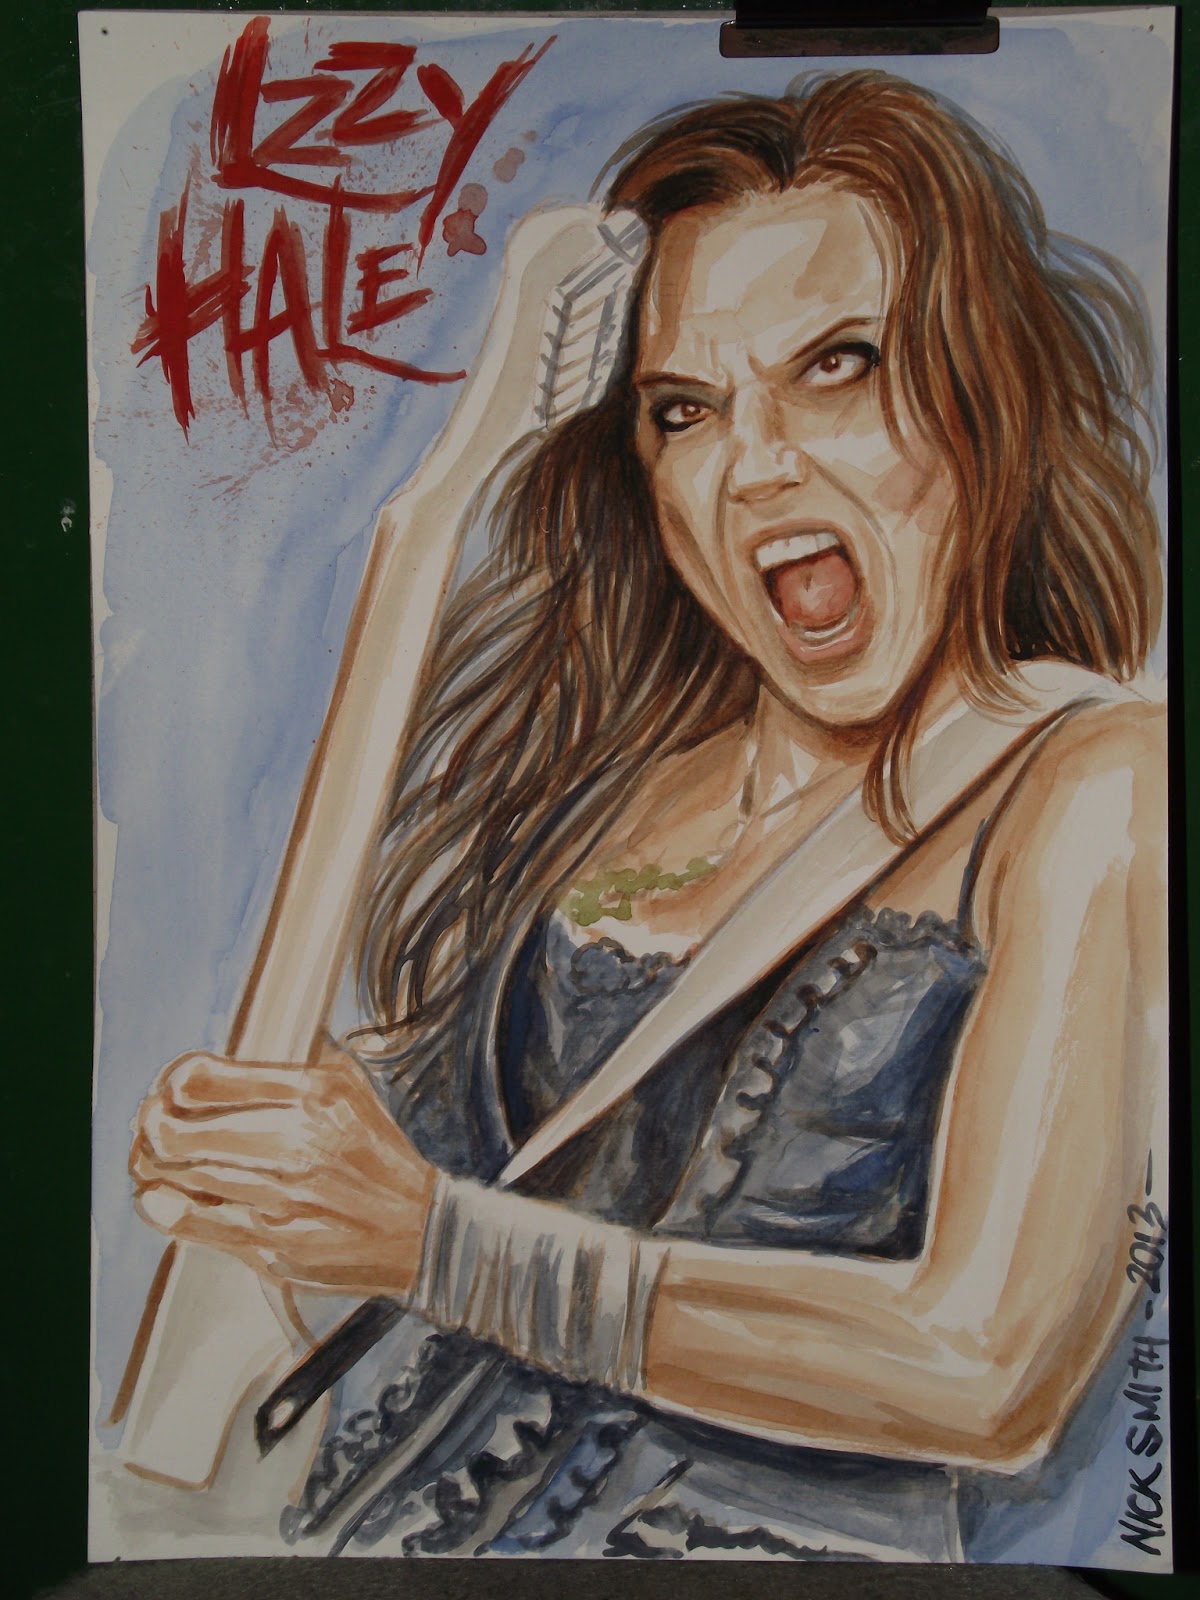 The Irrepressible LZZY HALE.